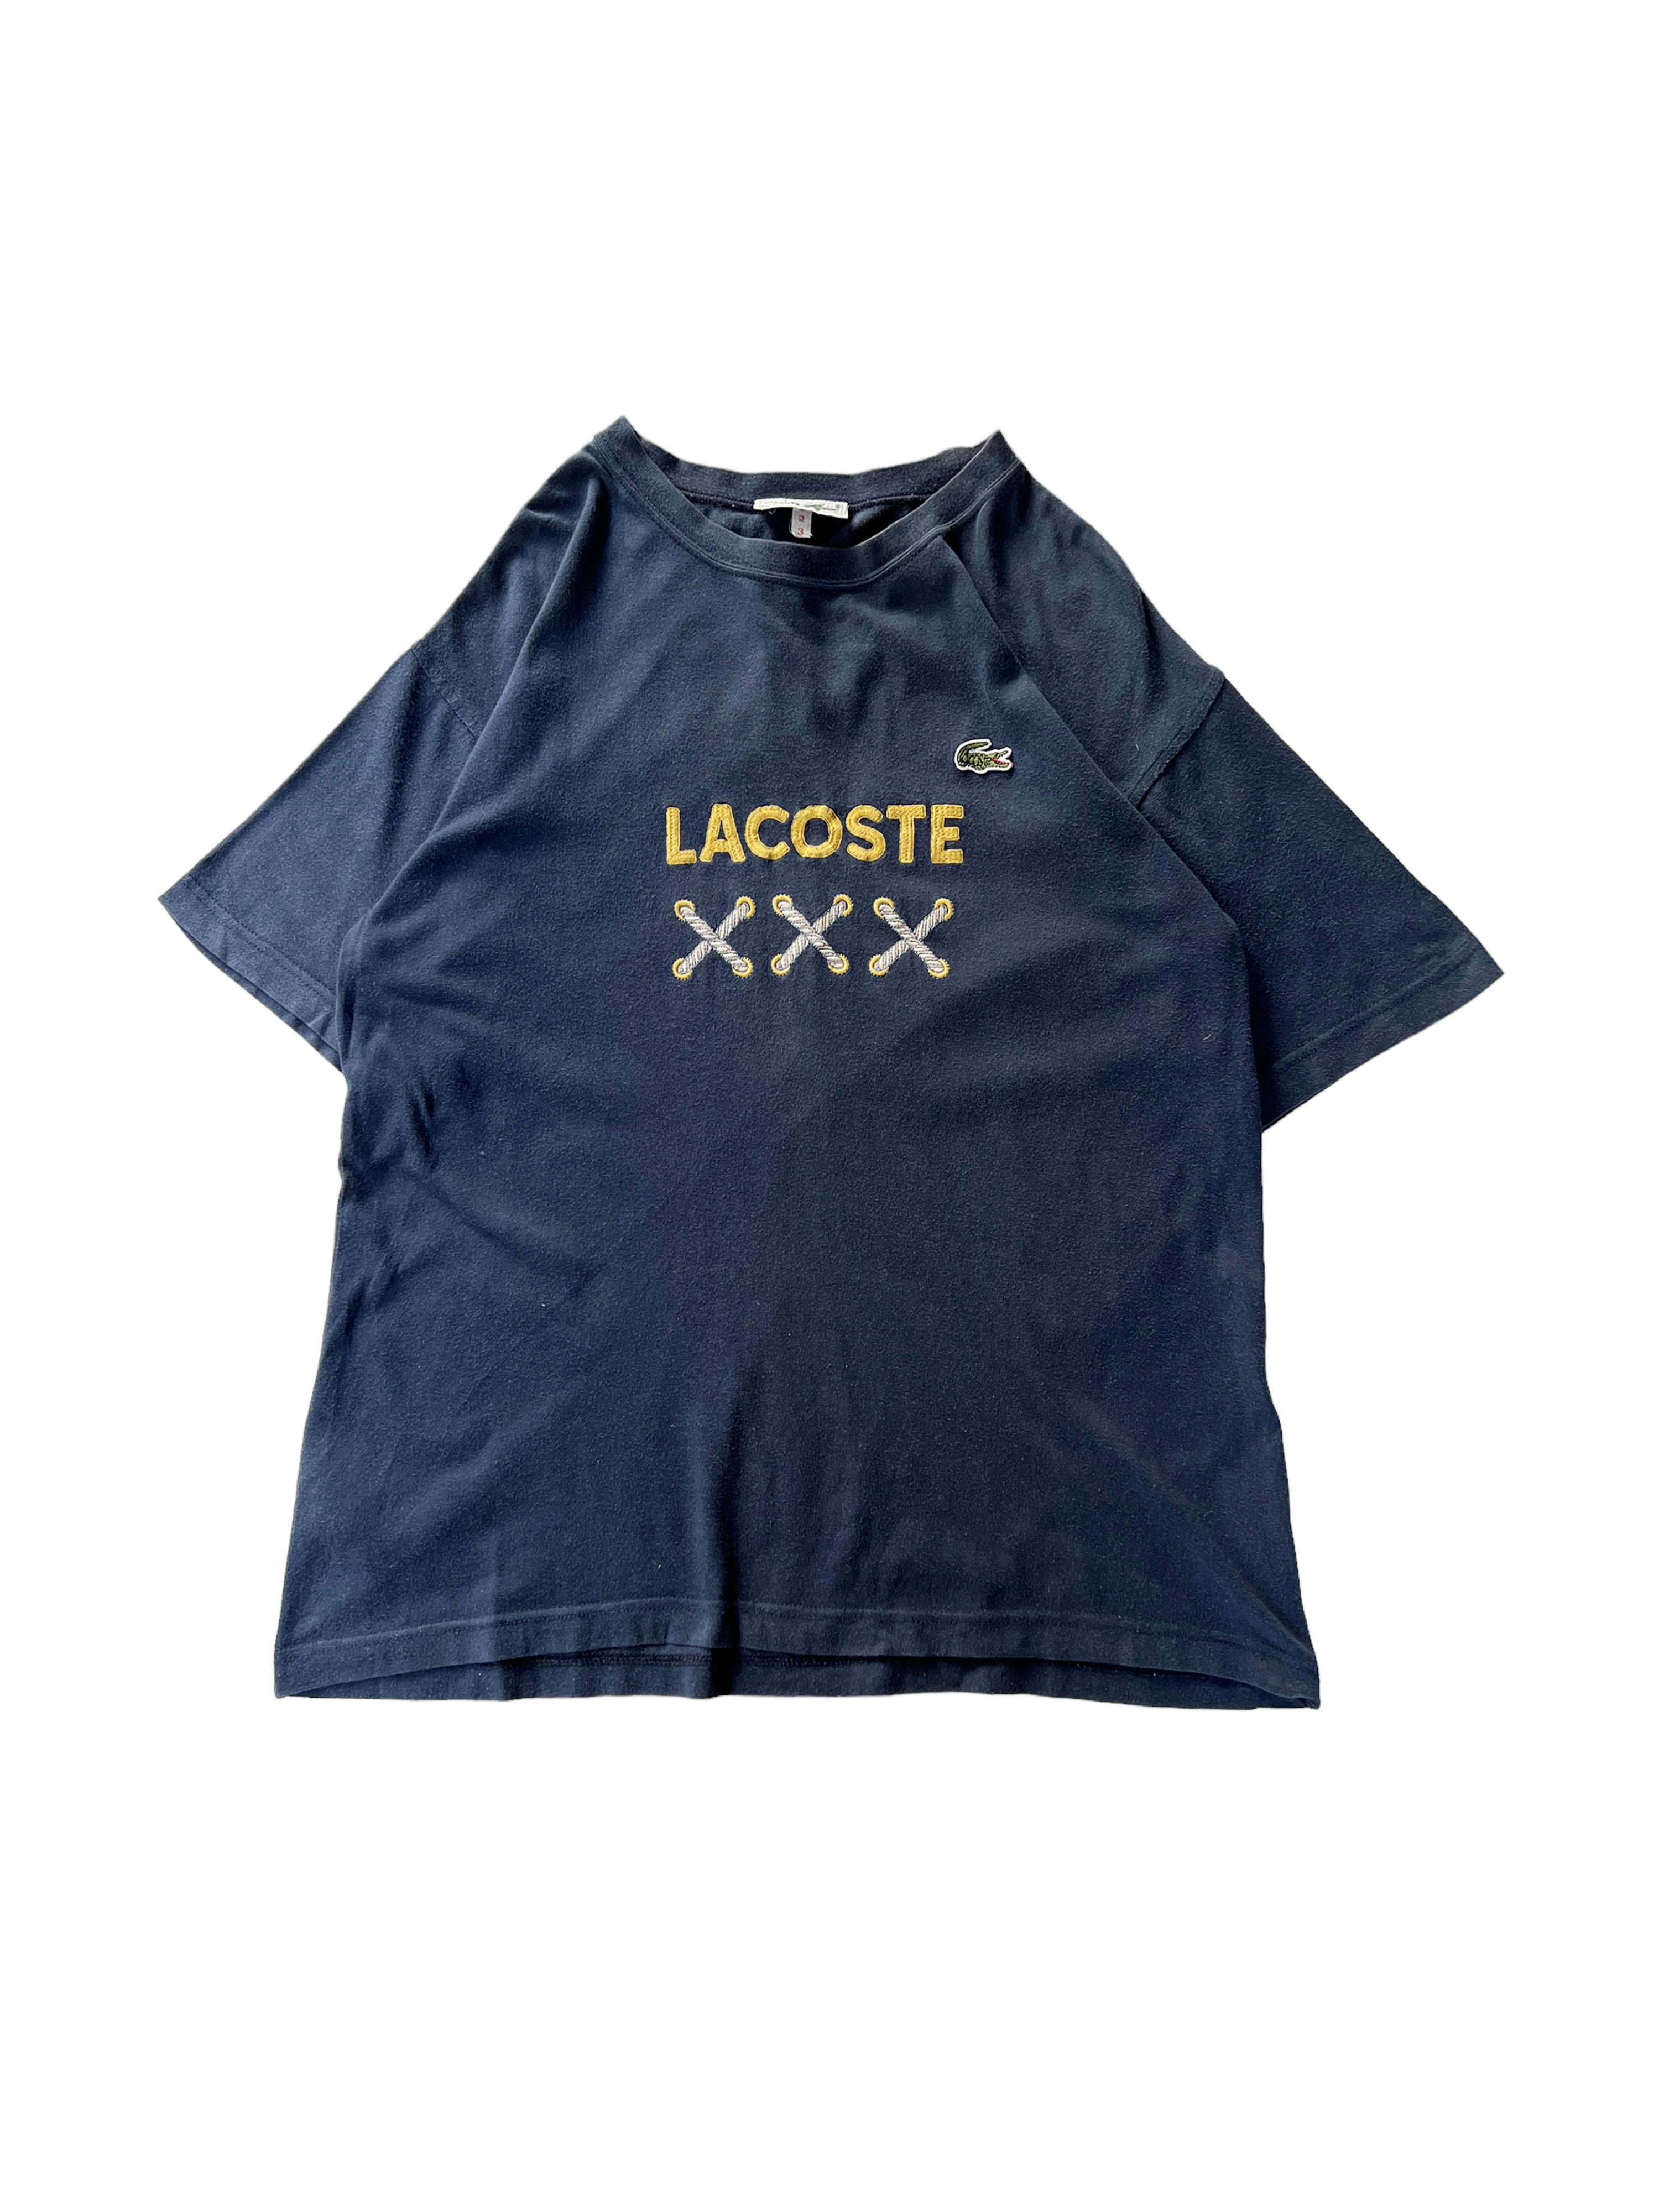 LACOSTE t-shirts